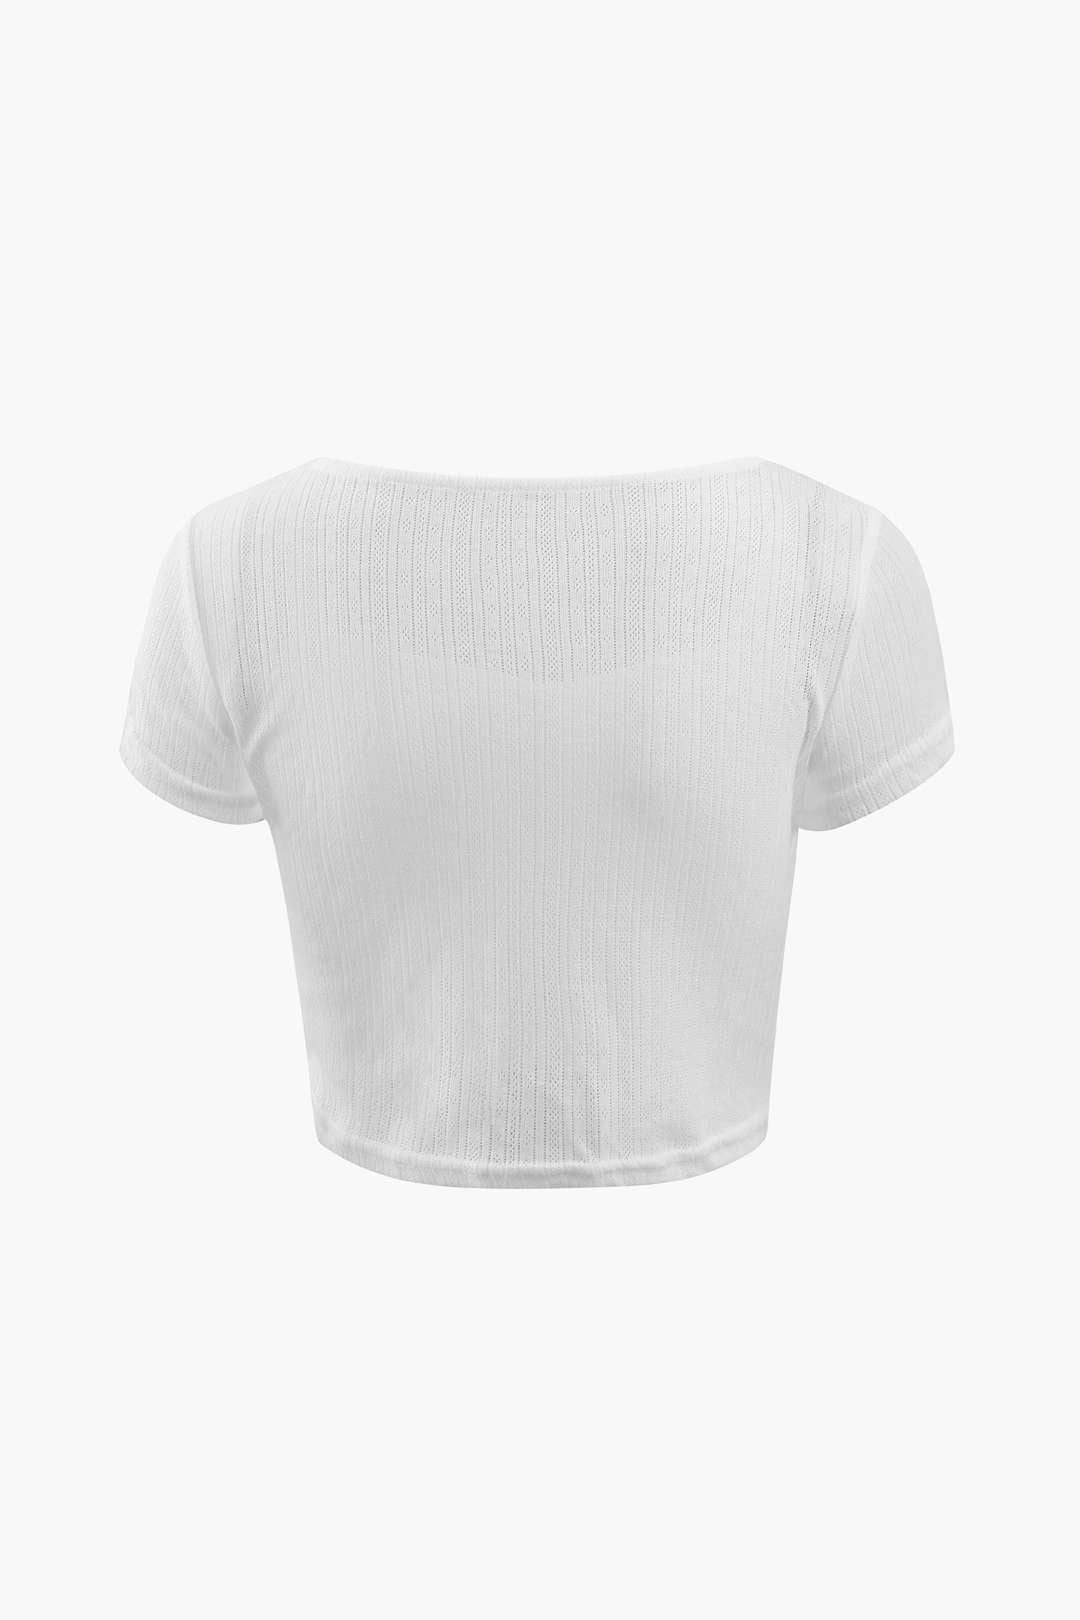 Square Neck Openwork Knit T-Shirt